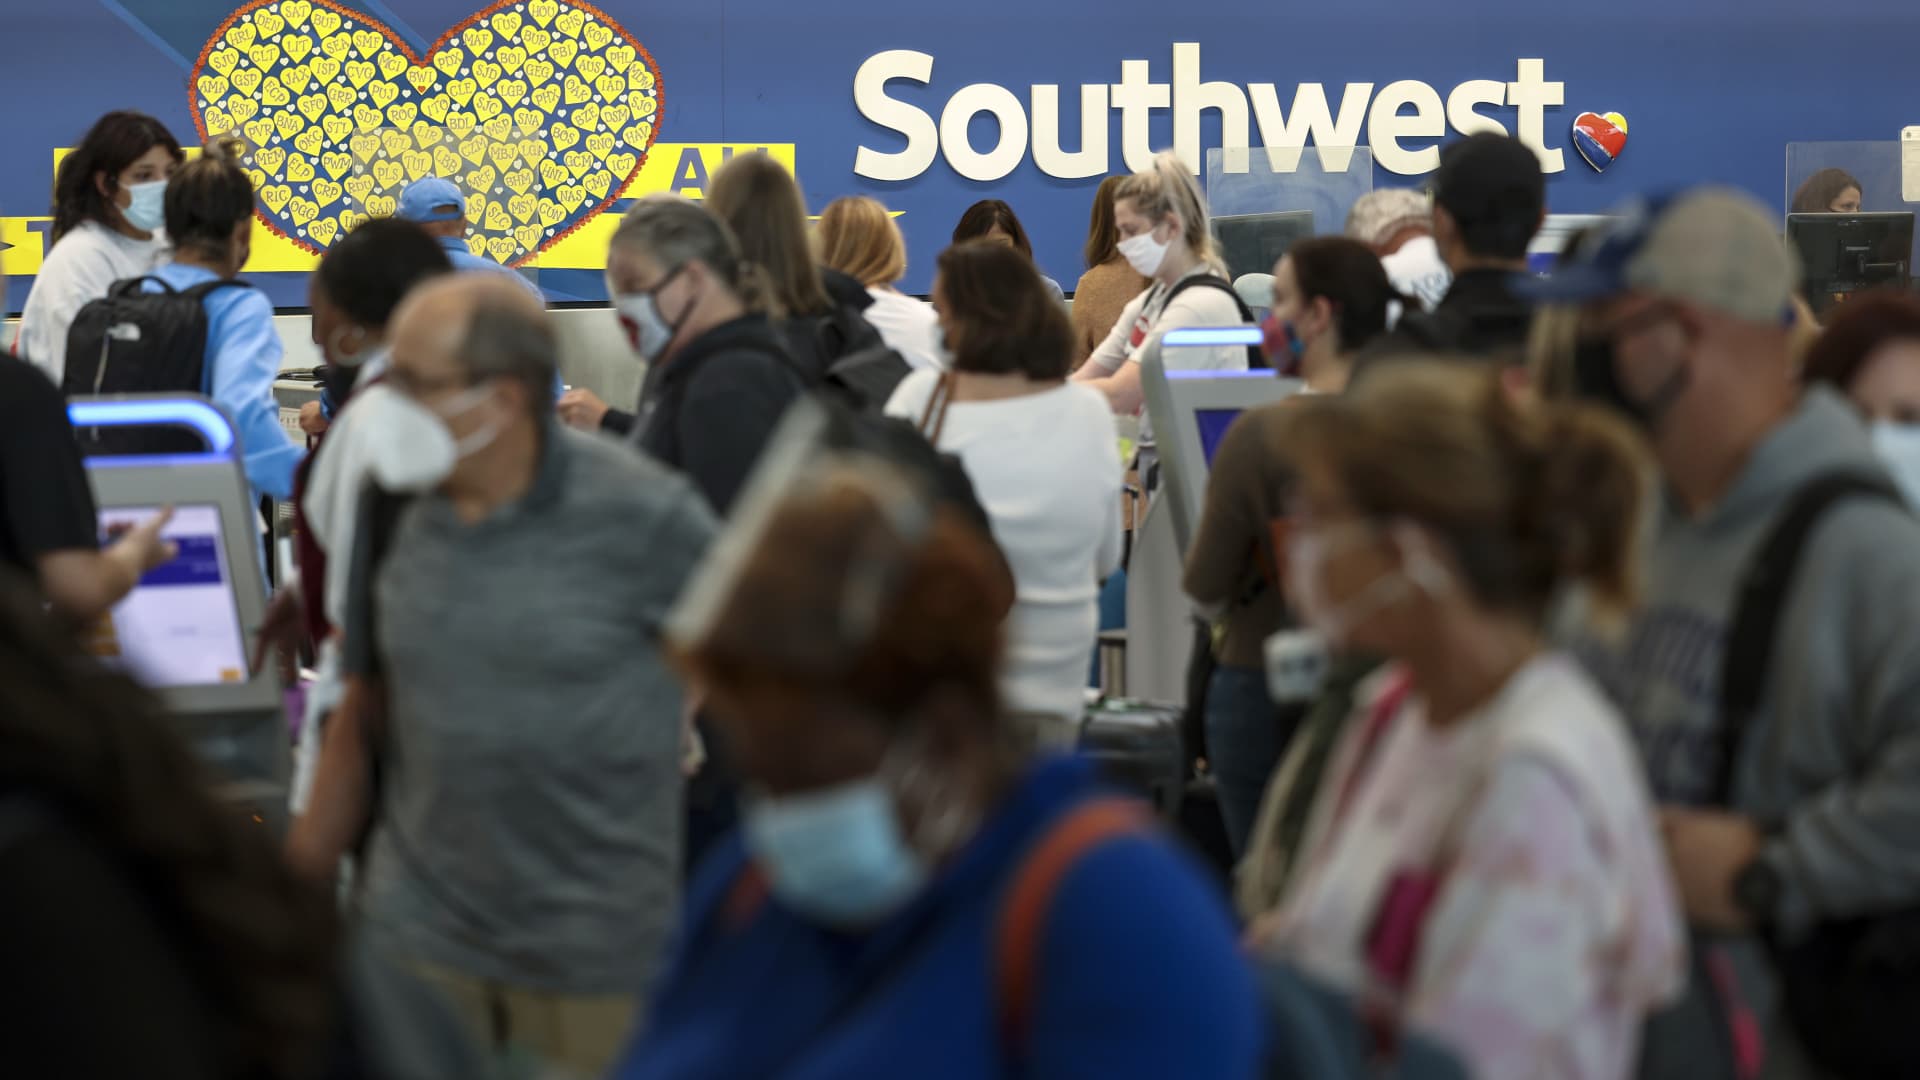 Travelers wait to check in at the Southwest Airlines ticketing counter at Baltimore Washington International Thurgood Marshall Airport on October 11, 2021 in Baltimore, Maryland.